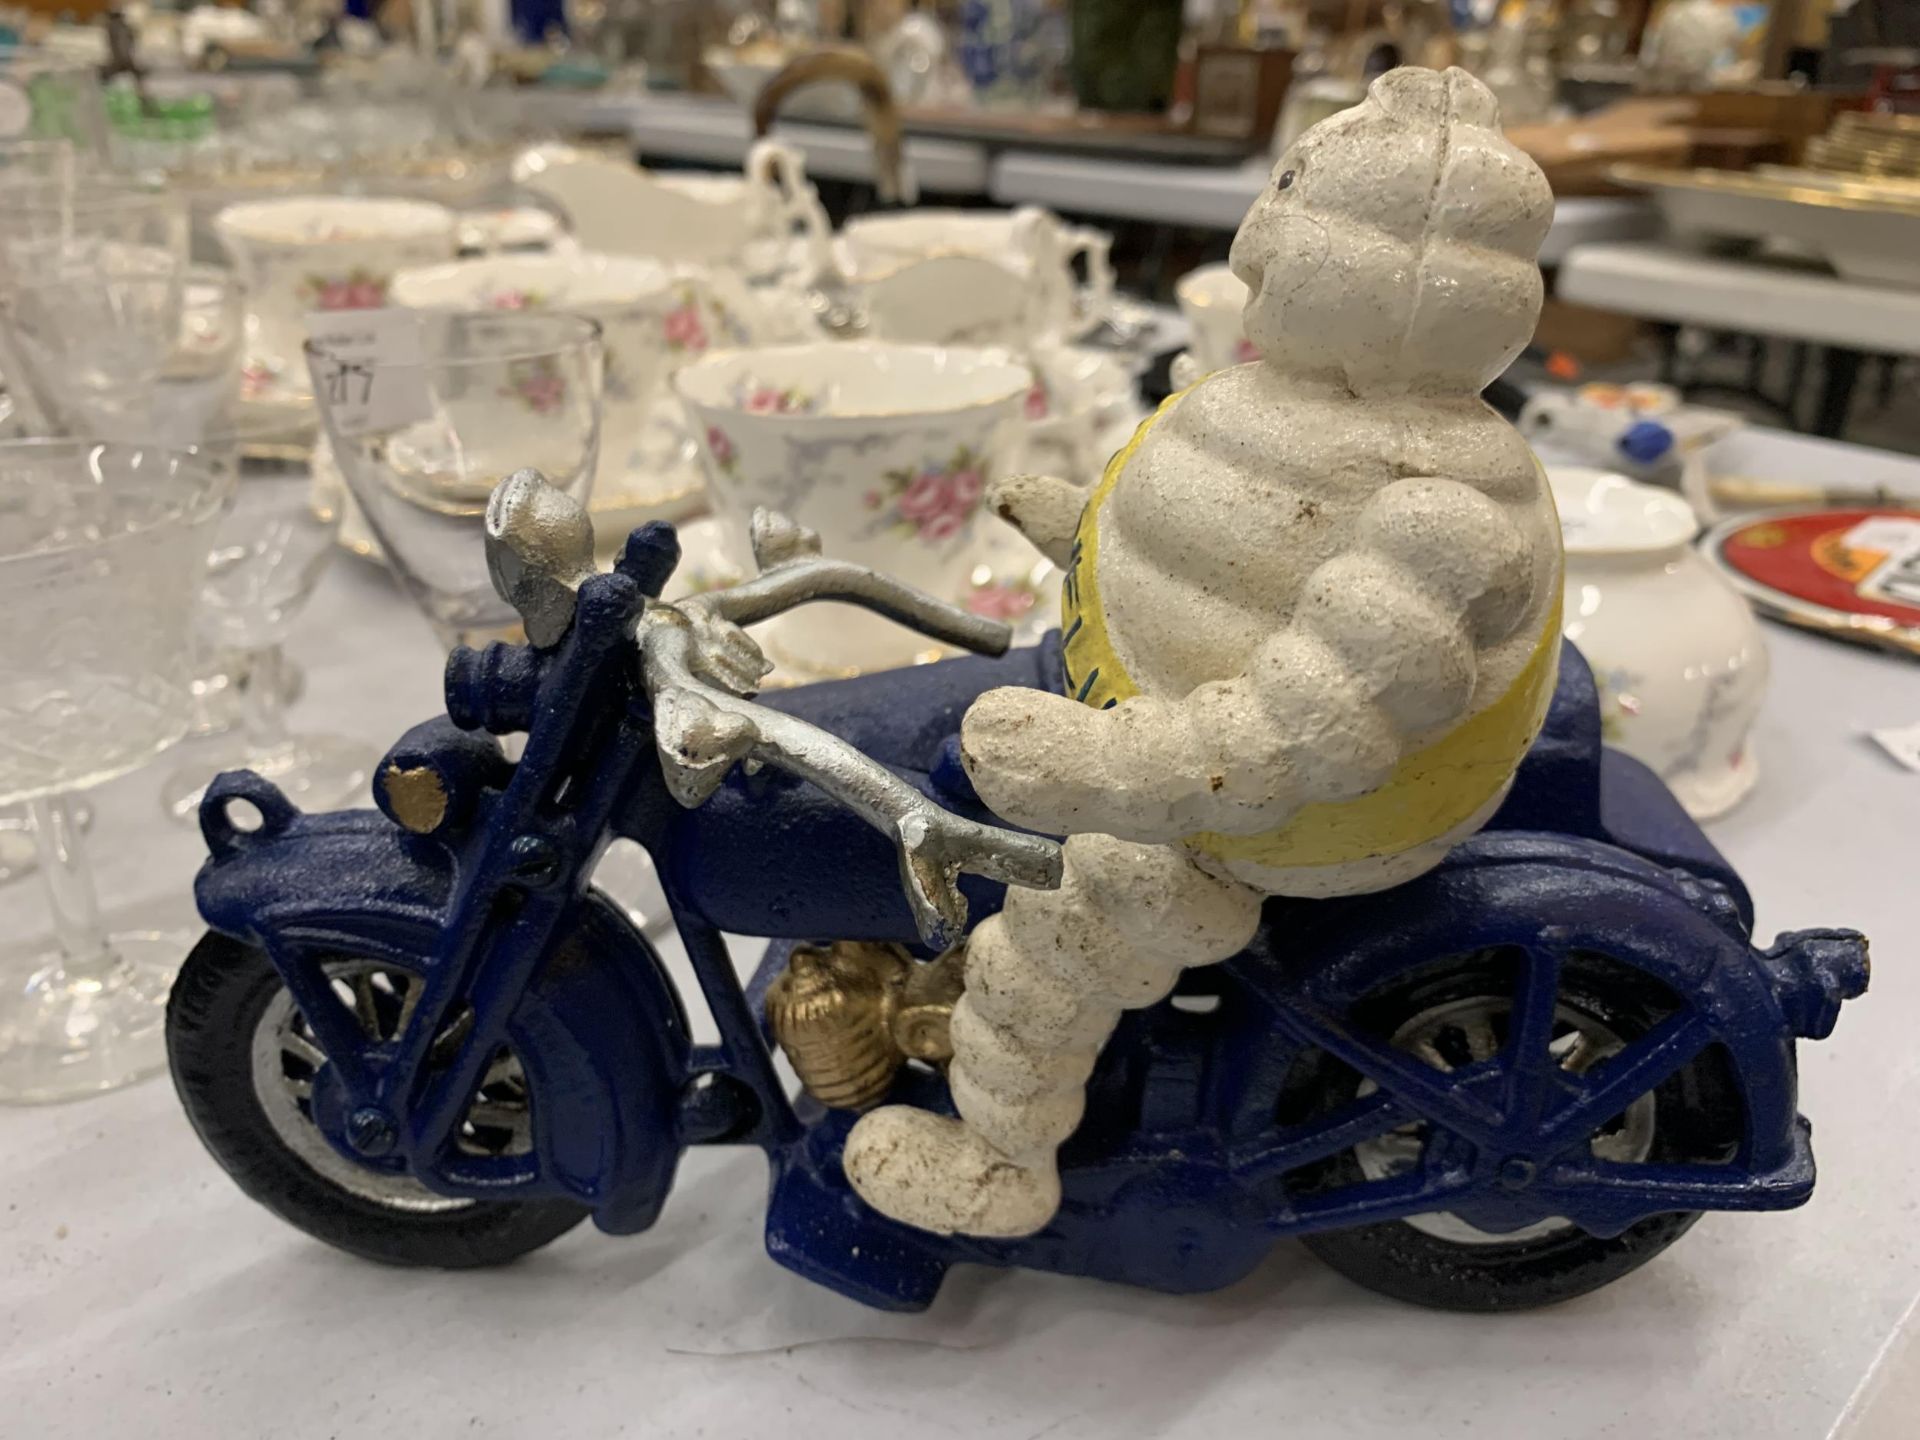 A CAST MICHELIN MAN ON A MOTOR BIKE WITH A SIDE CAR - Image 5 of 5